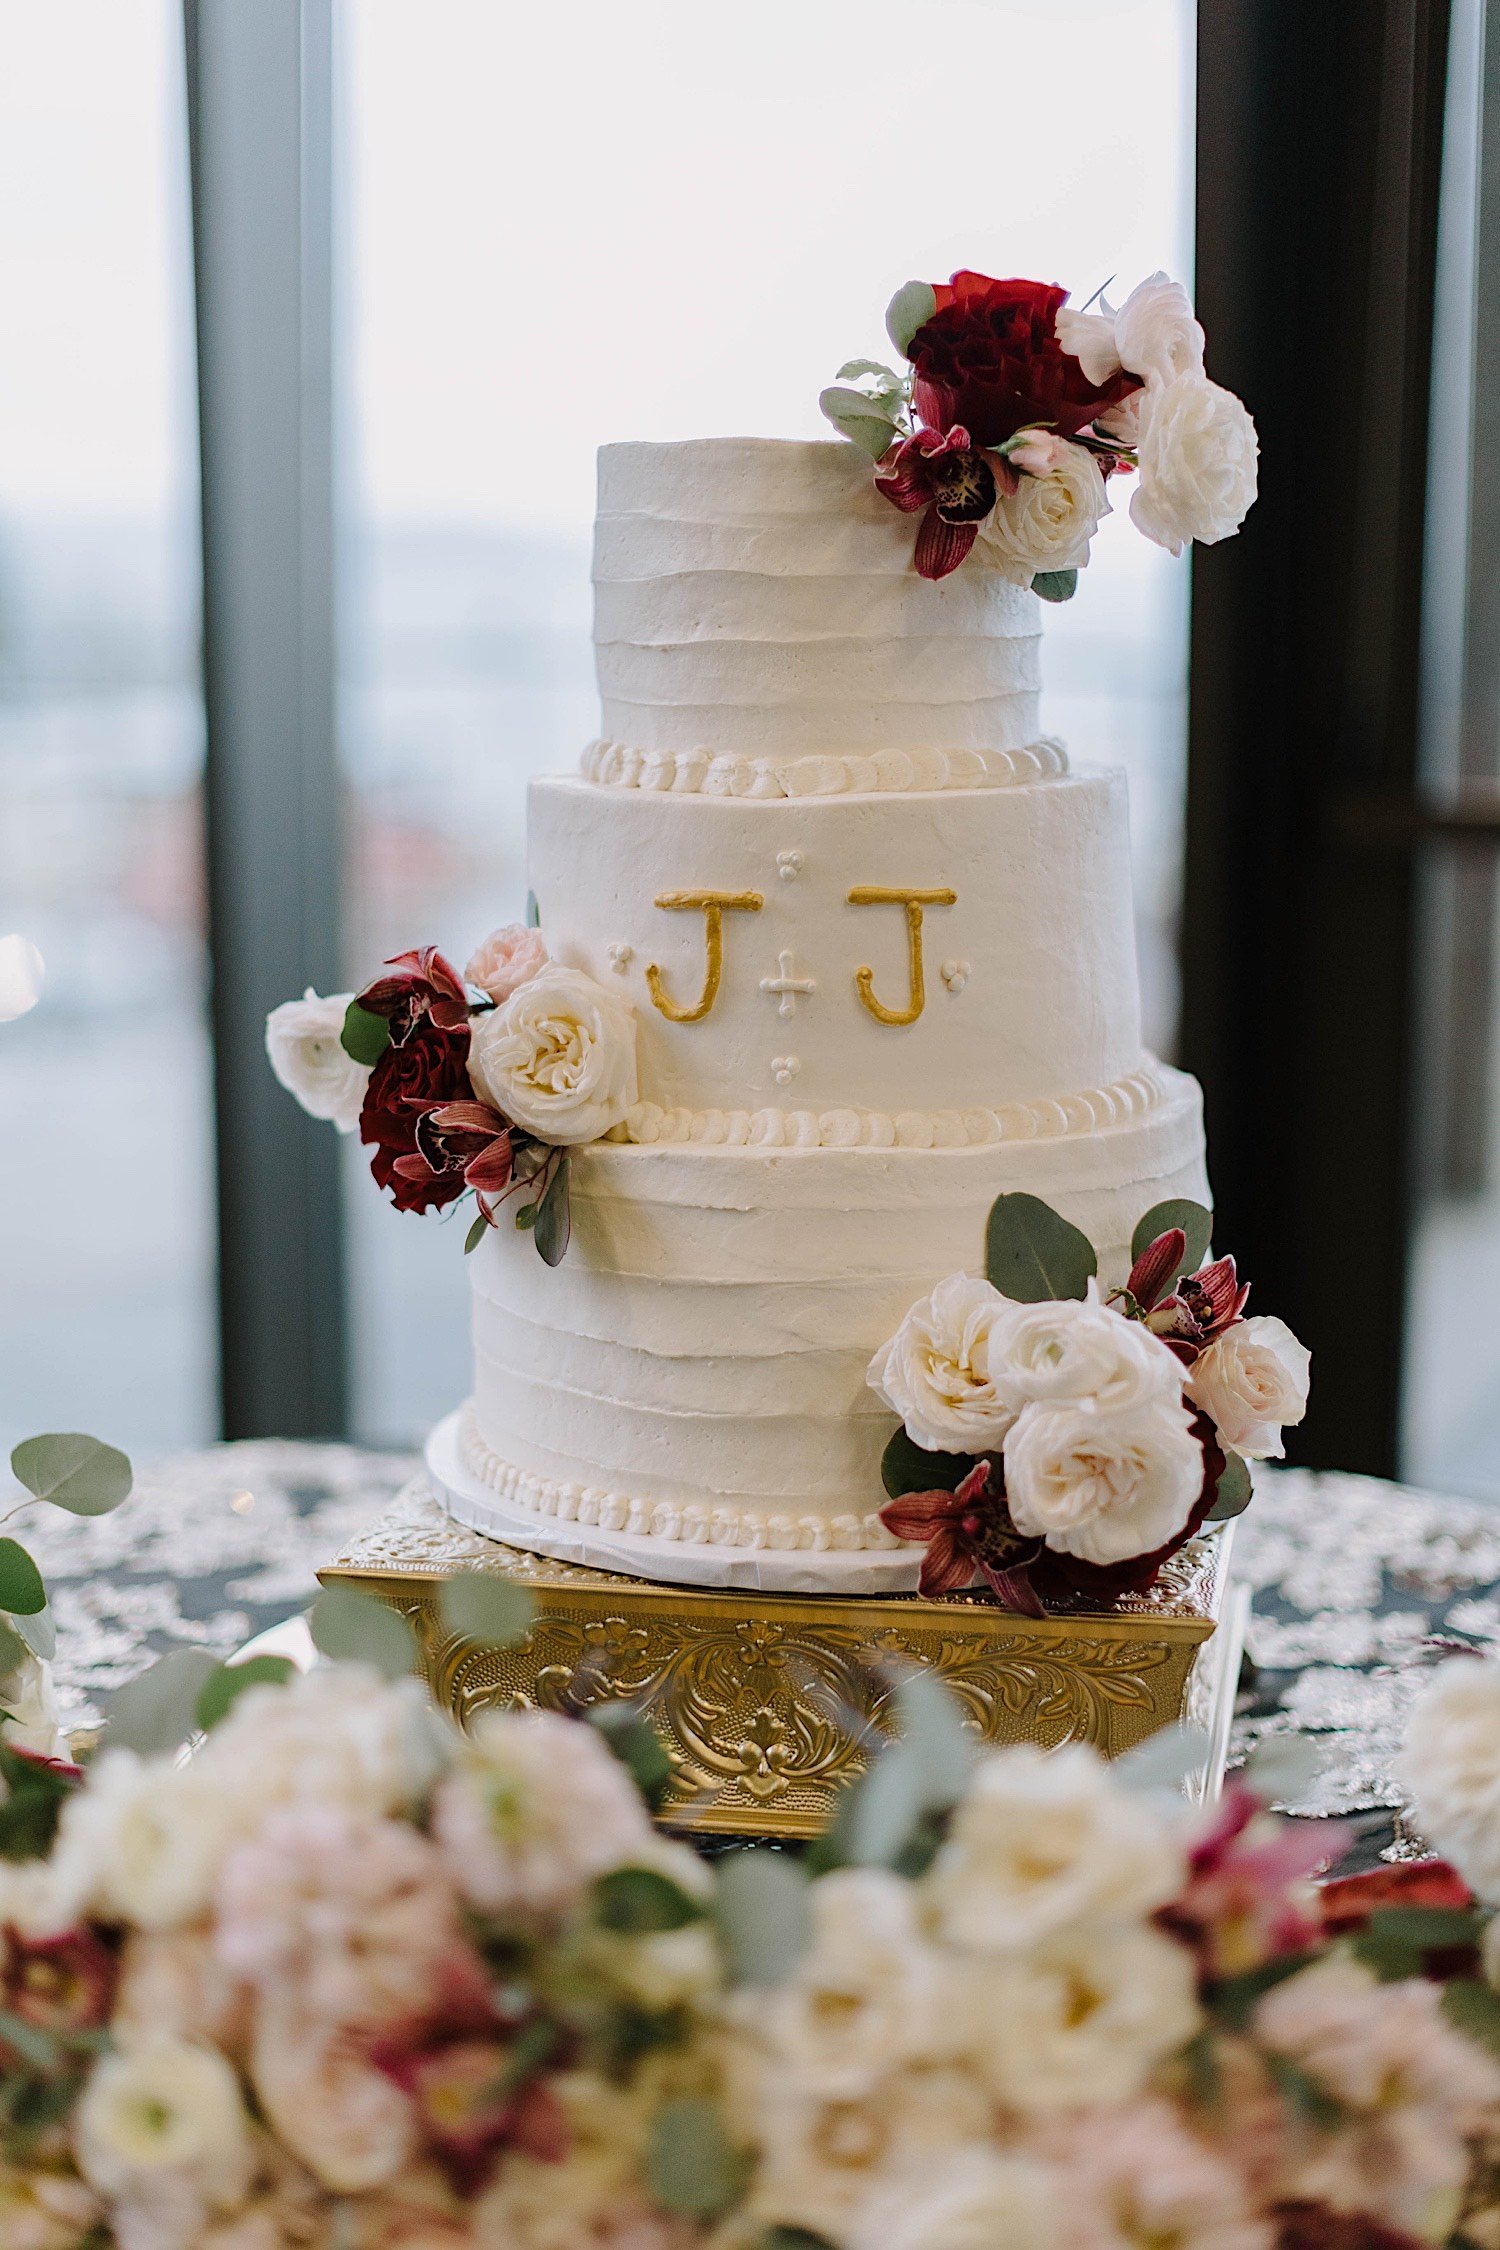 Wedding cake with initials J + J on the side surrounded by flowers